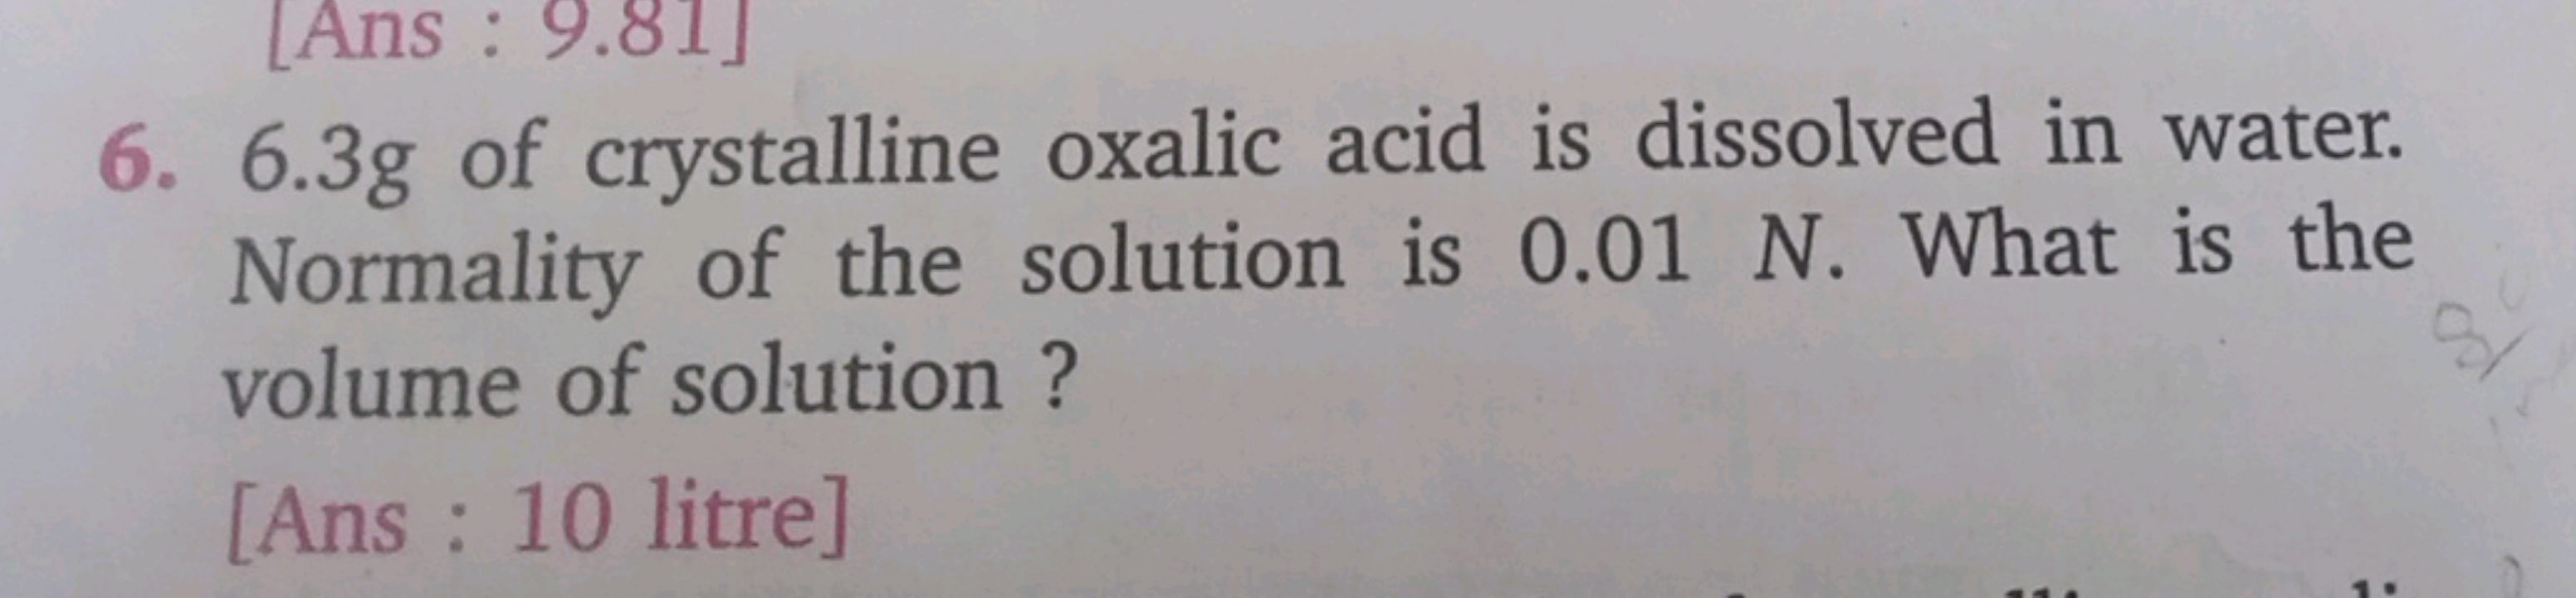 6. 6.3 g of crystalline oxalic acid is dissolved in water. Normality o